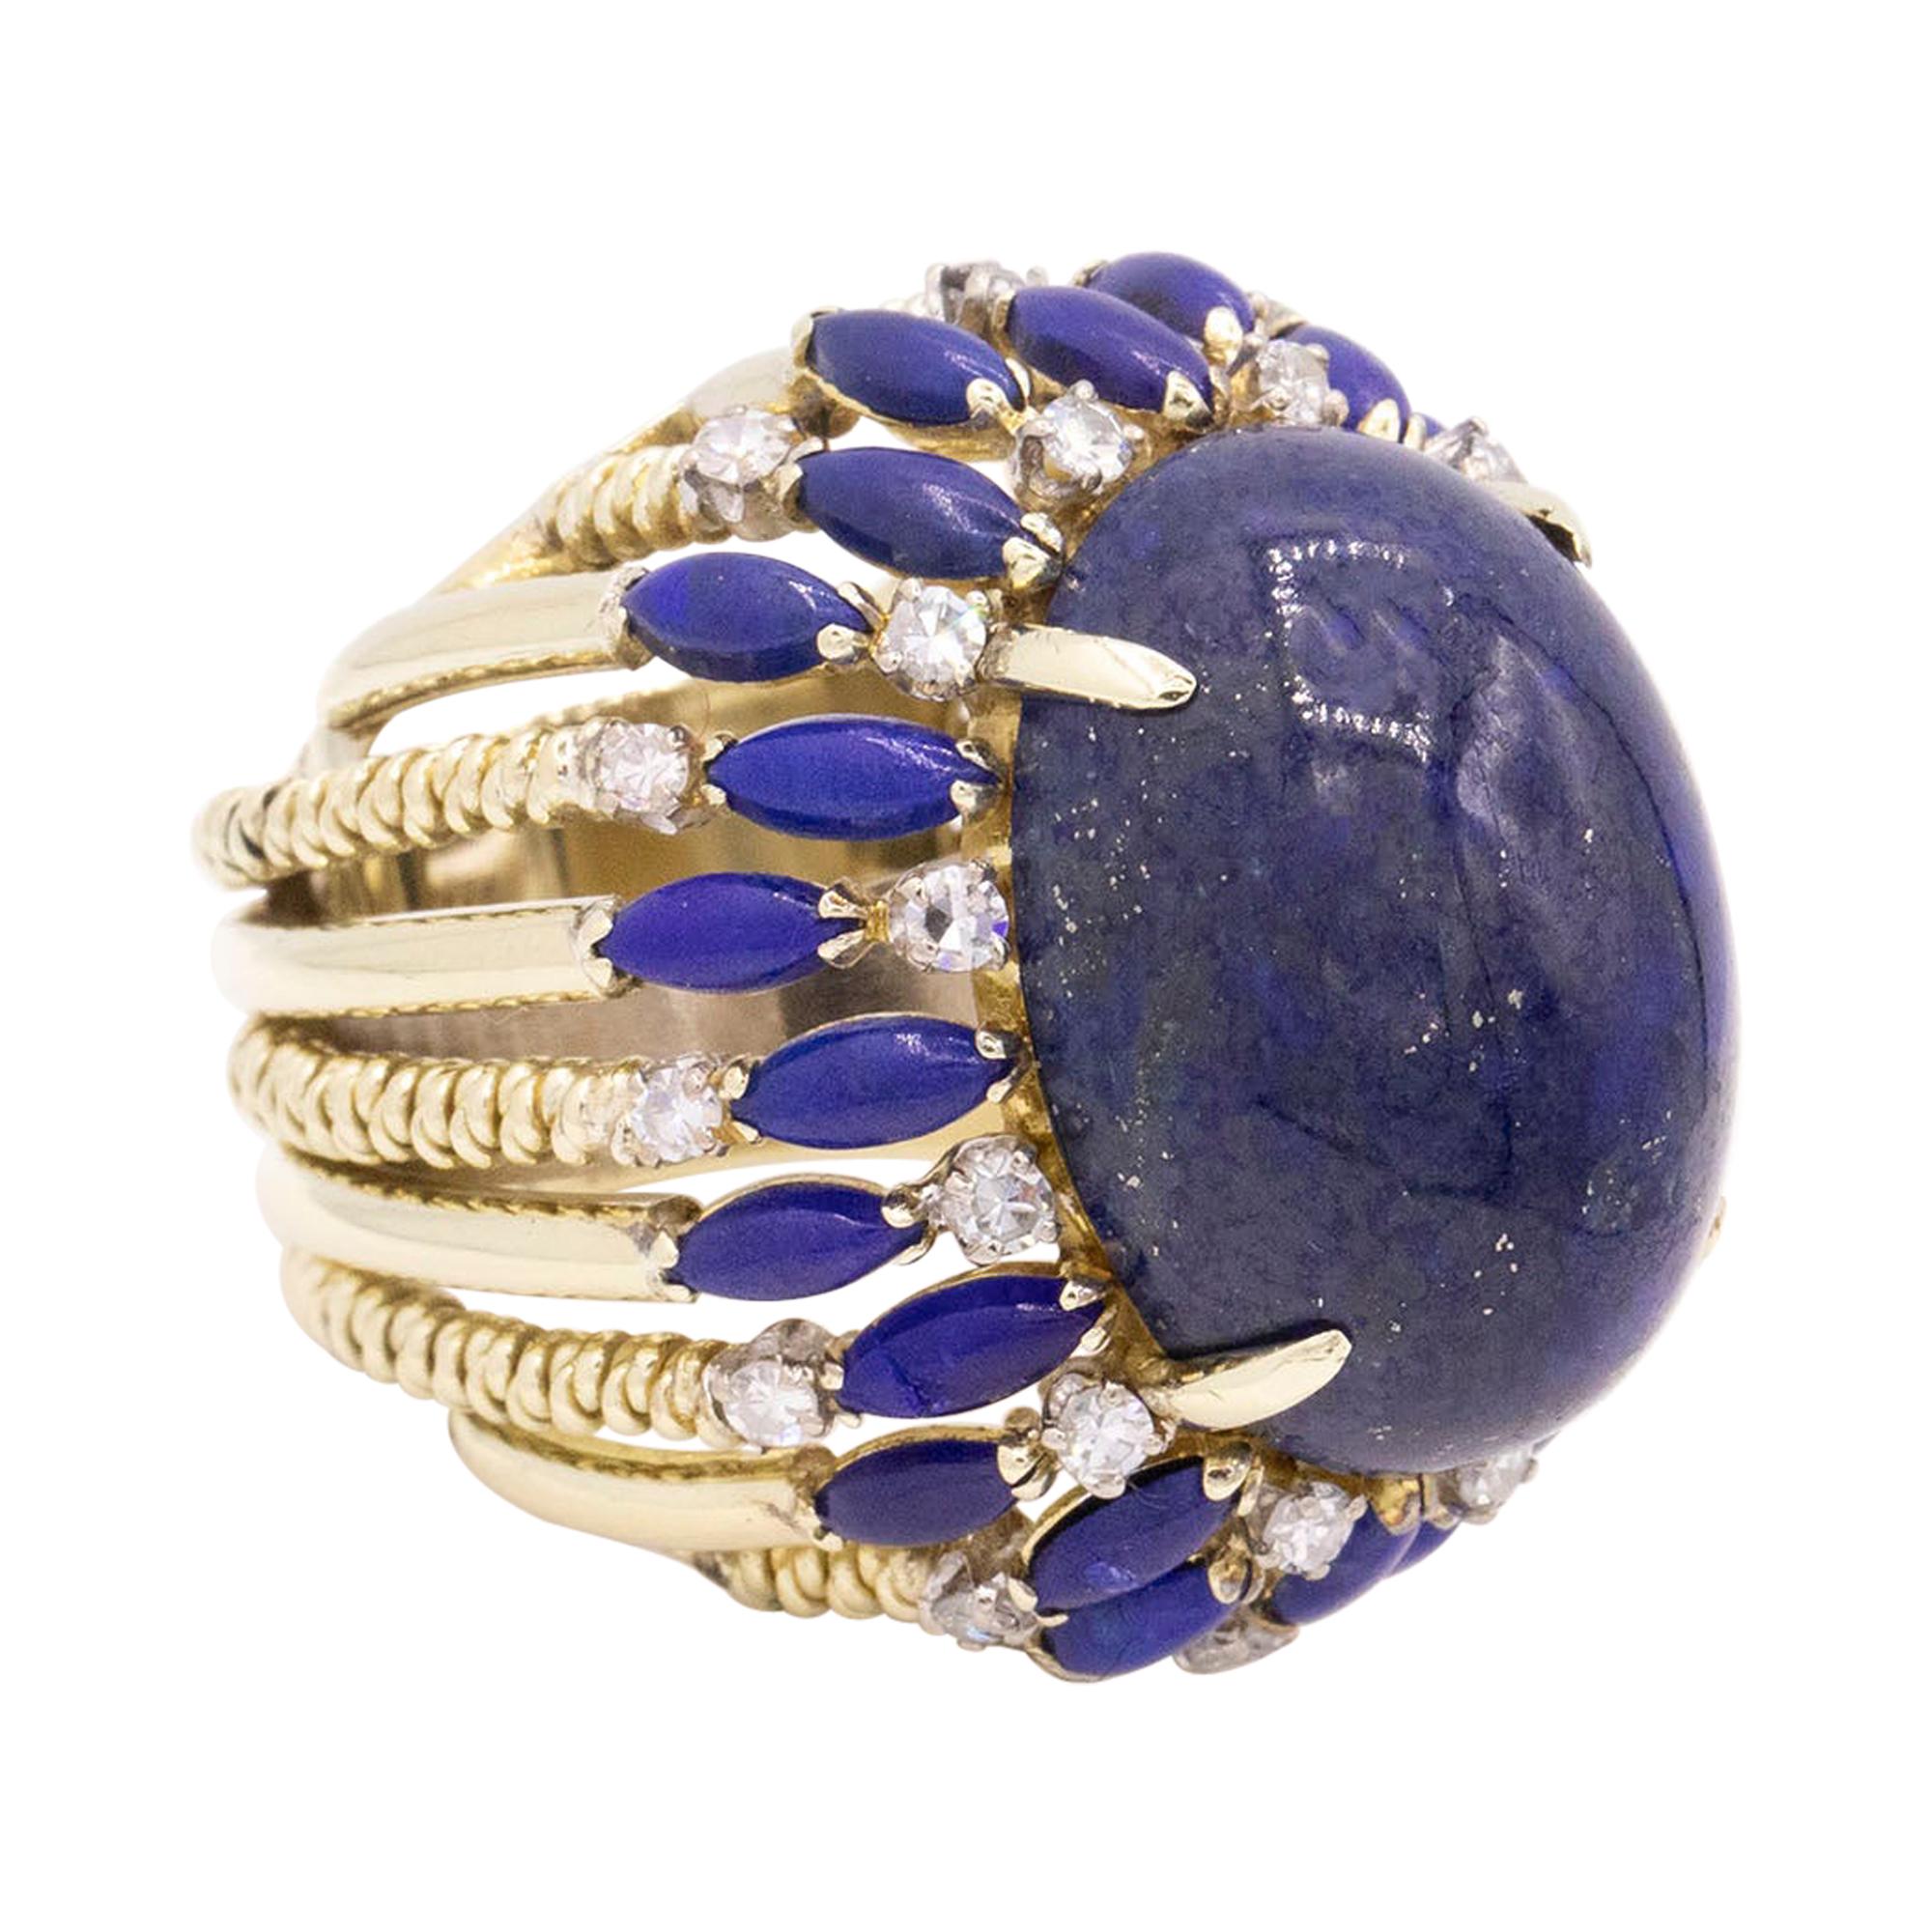 Jewels House Fancy Lapis Lazuli Oval Gemstone Silver Plated Handmade Vintage Style Ring US-7.25